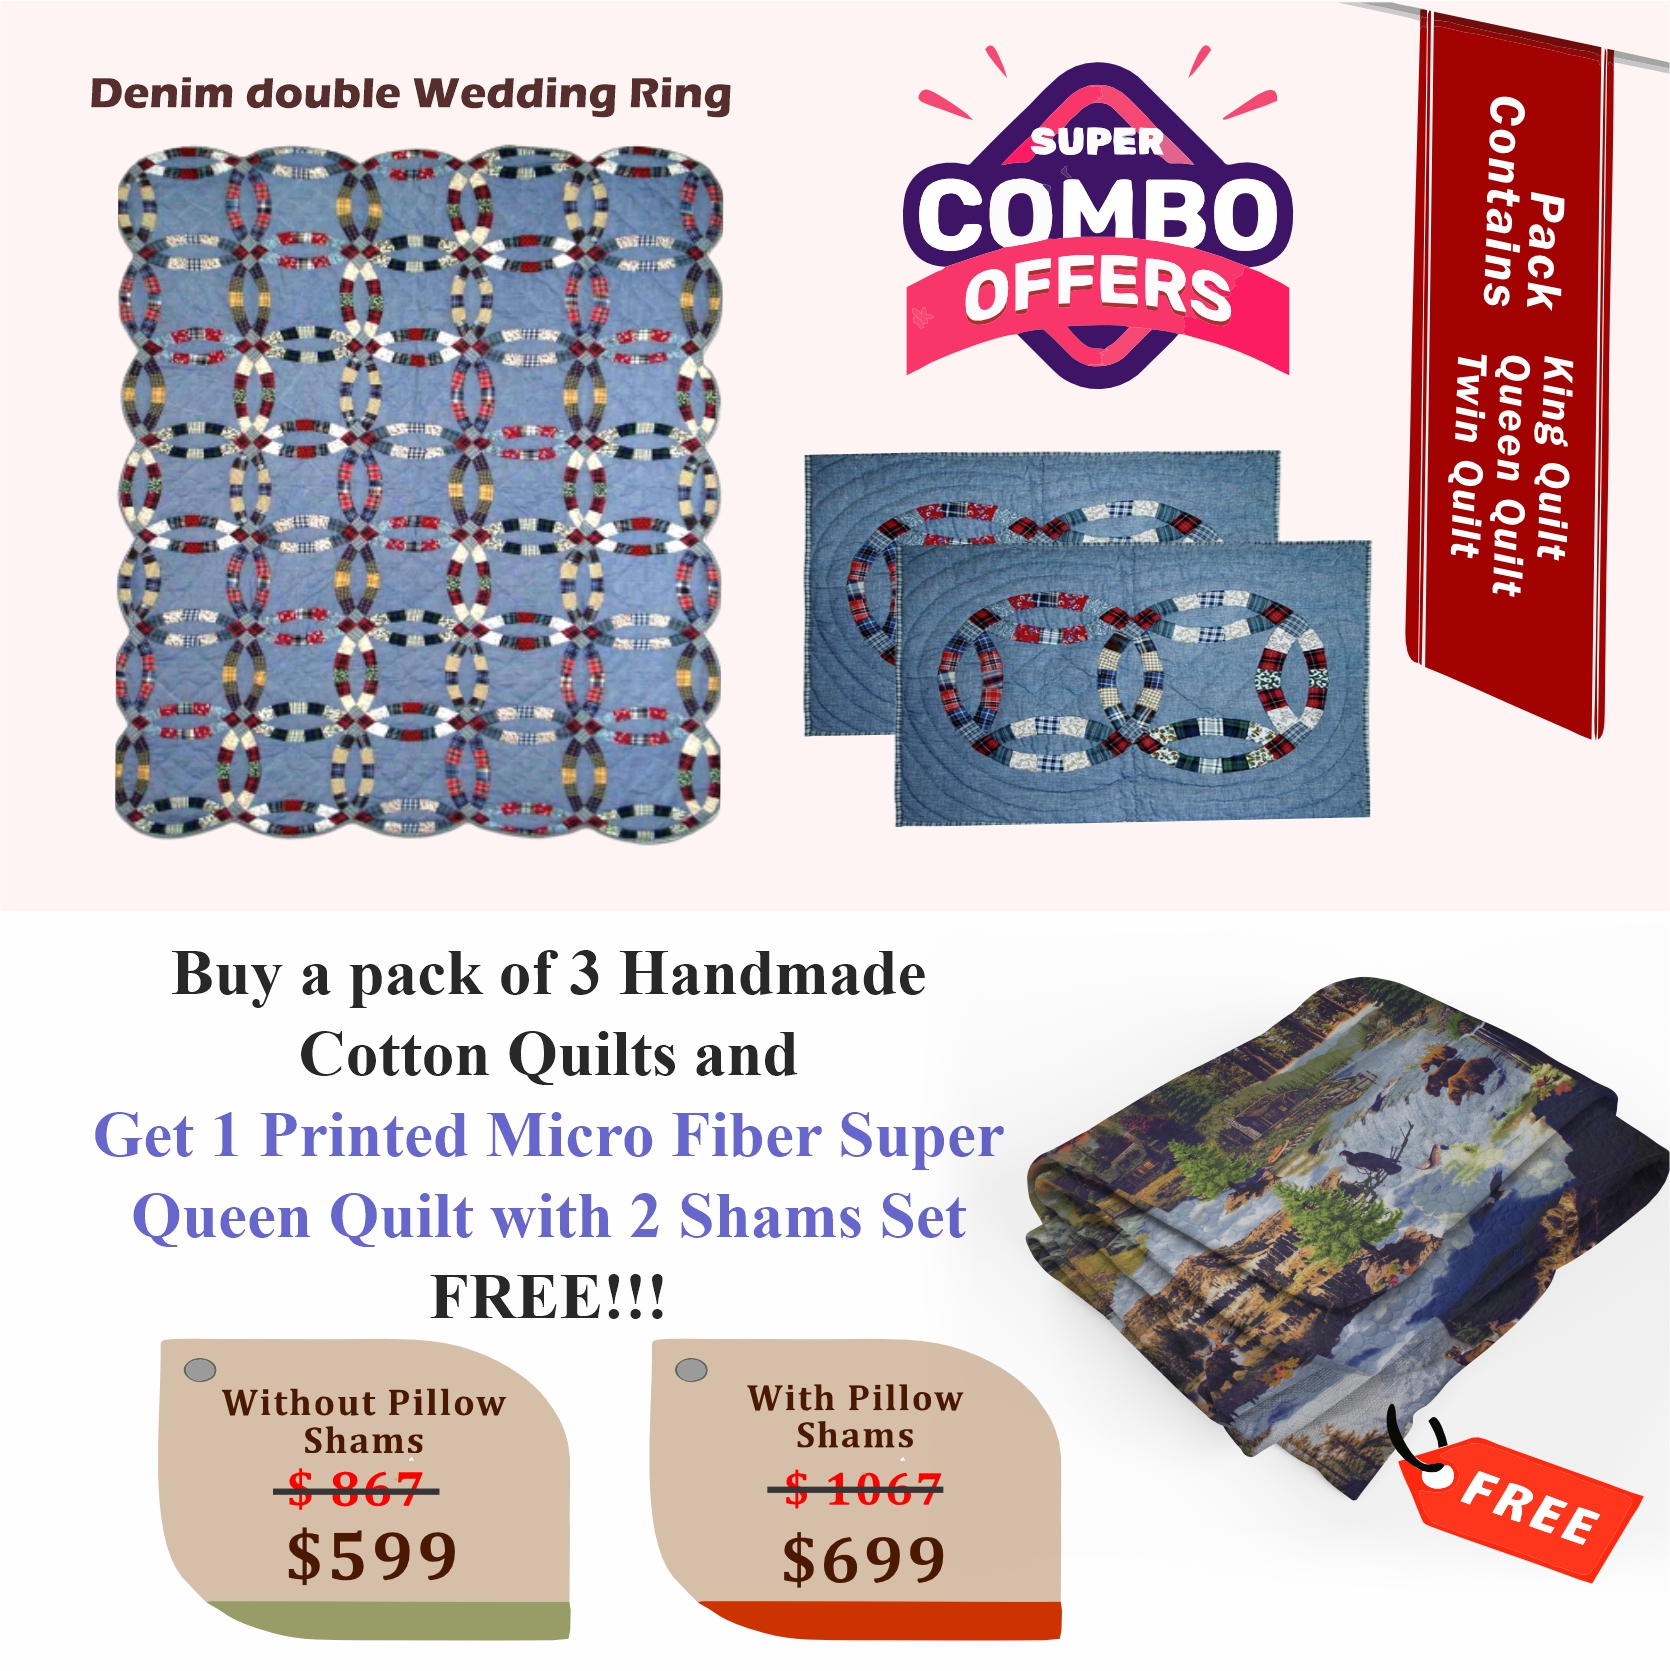 Blue cascade - Handmade Cotton quilts | Buy 3 cotton quilts and get 1 Printed Microfiber Super Queen Quilt with 2 Shams set FREE